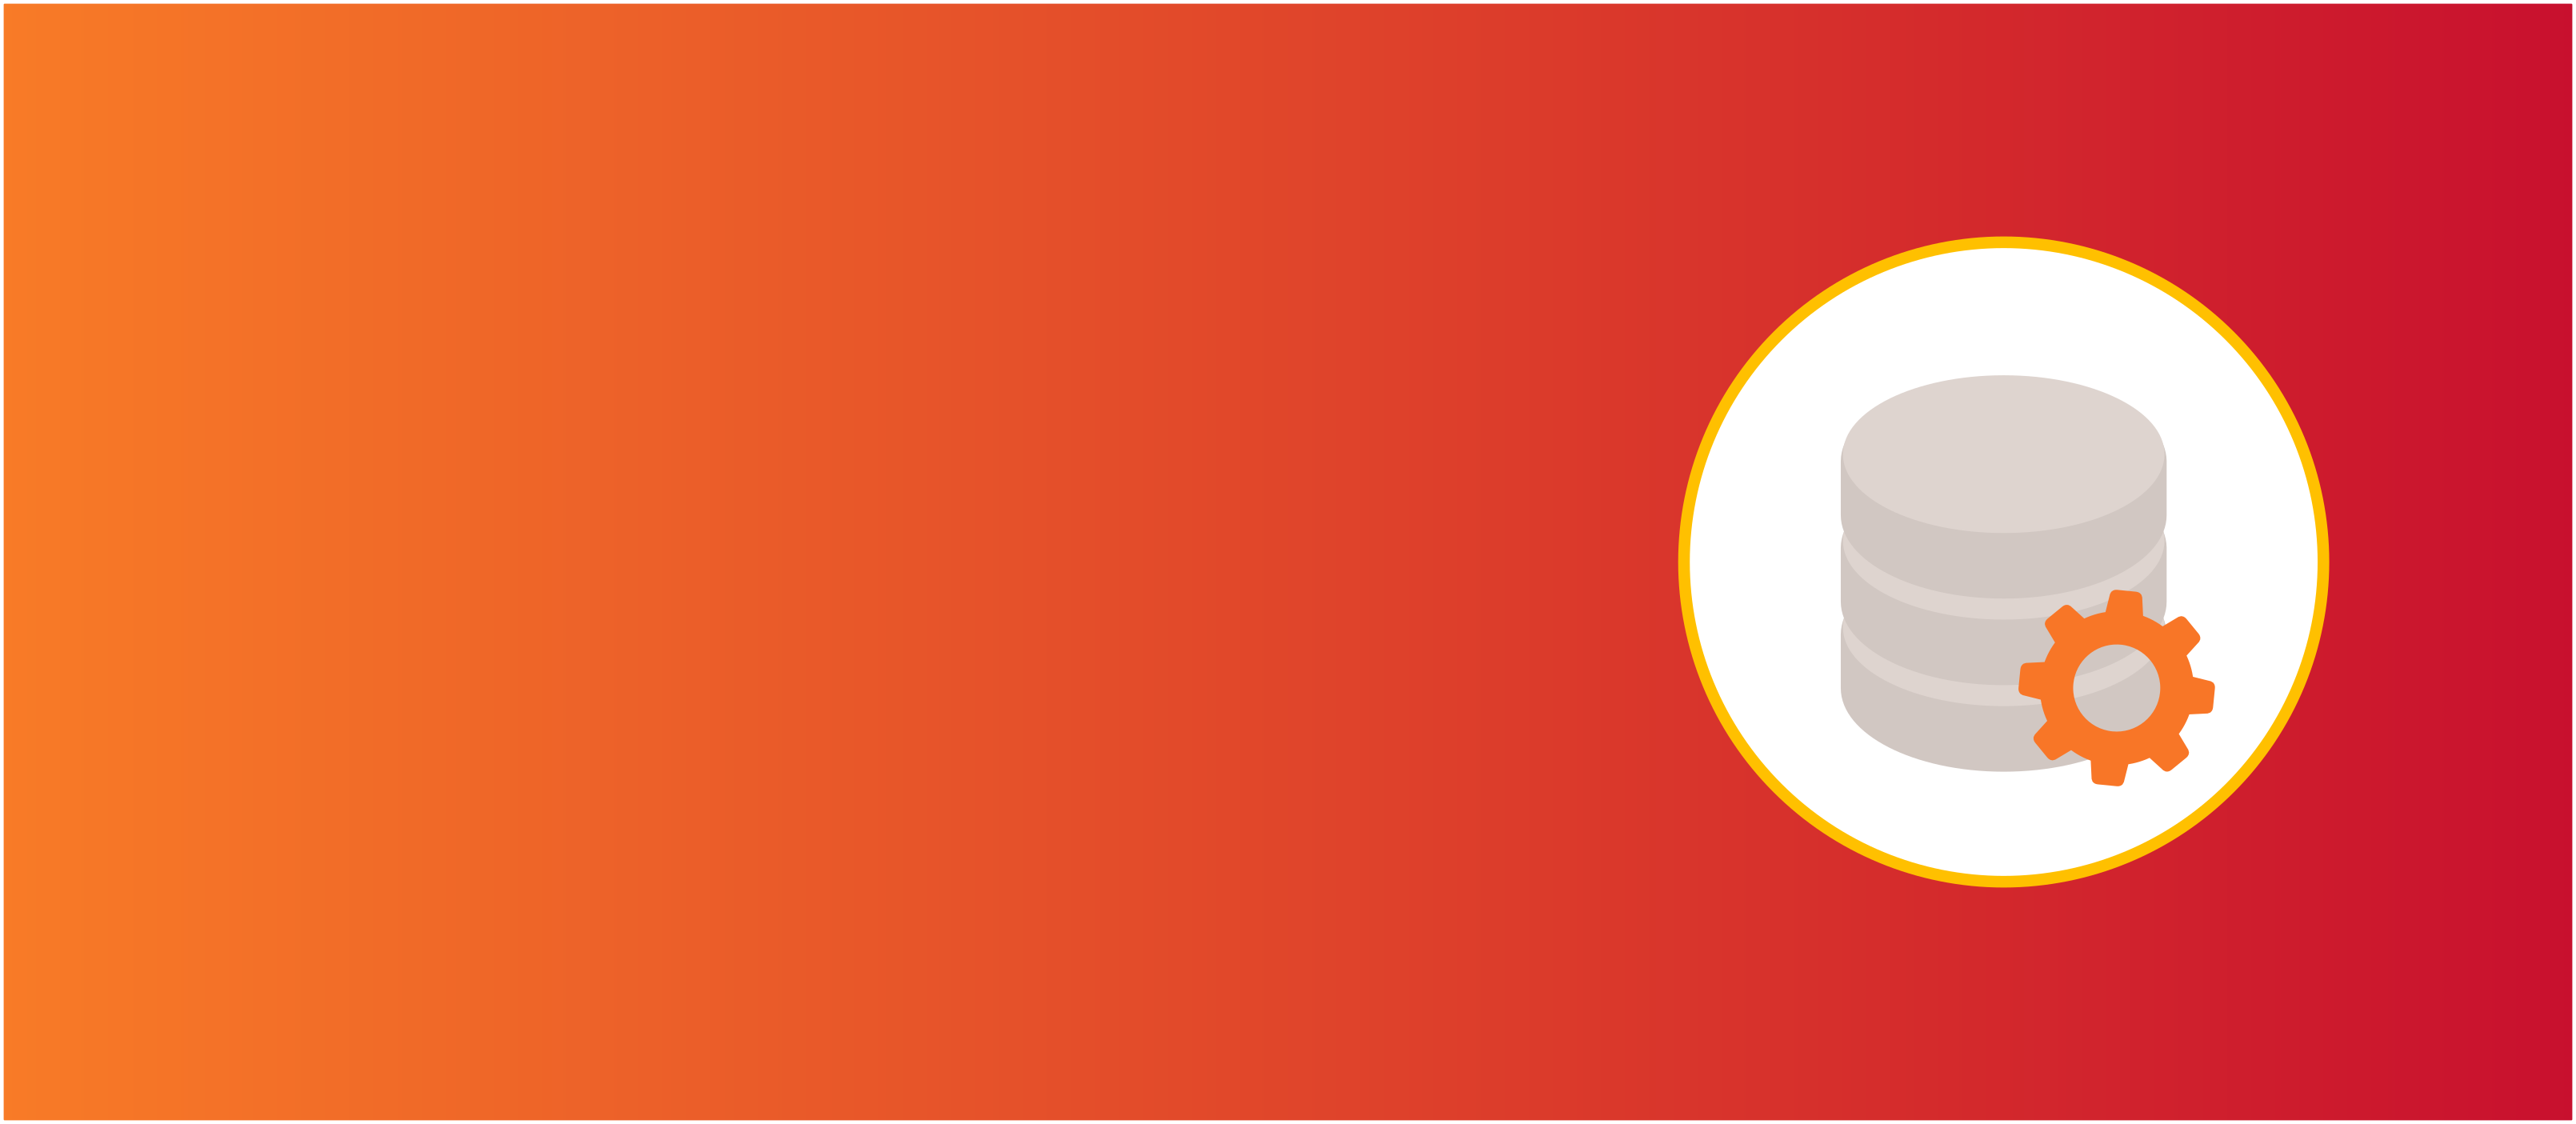 Icon of a database with an orange cog next to it, on a background of orange-to-red gradient